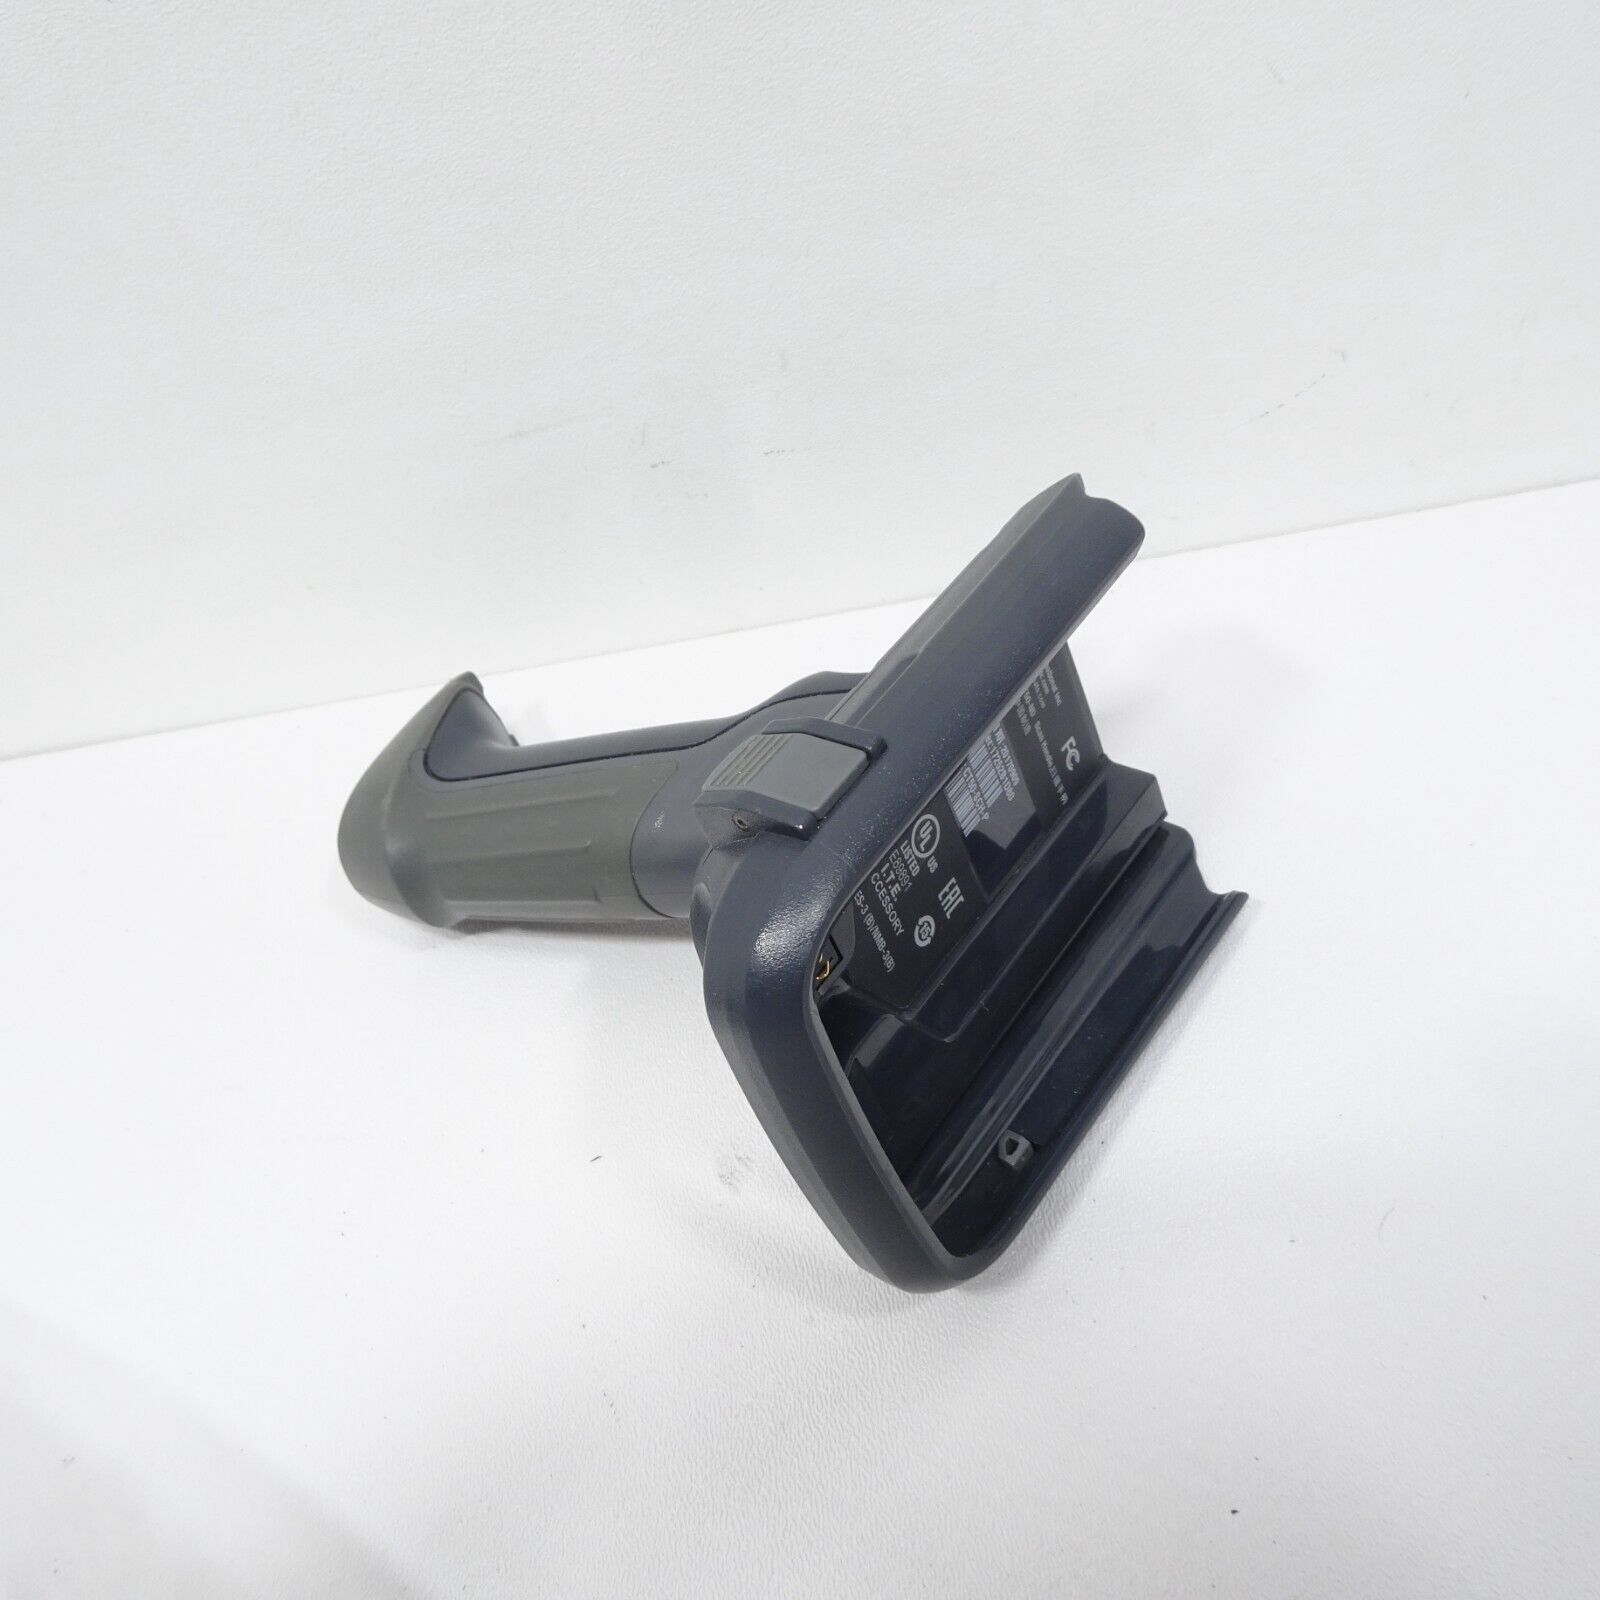 Primary image for Genuine Honeywell Scan Handle CT50-Nd  Only Handle